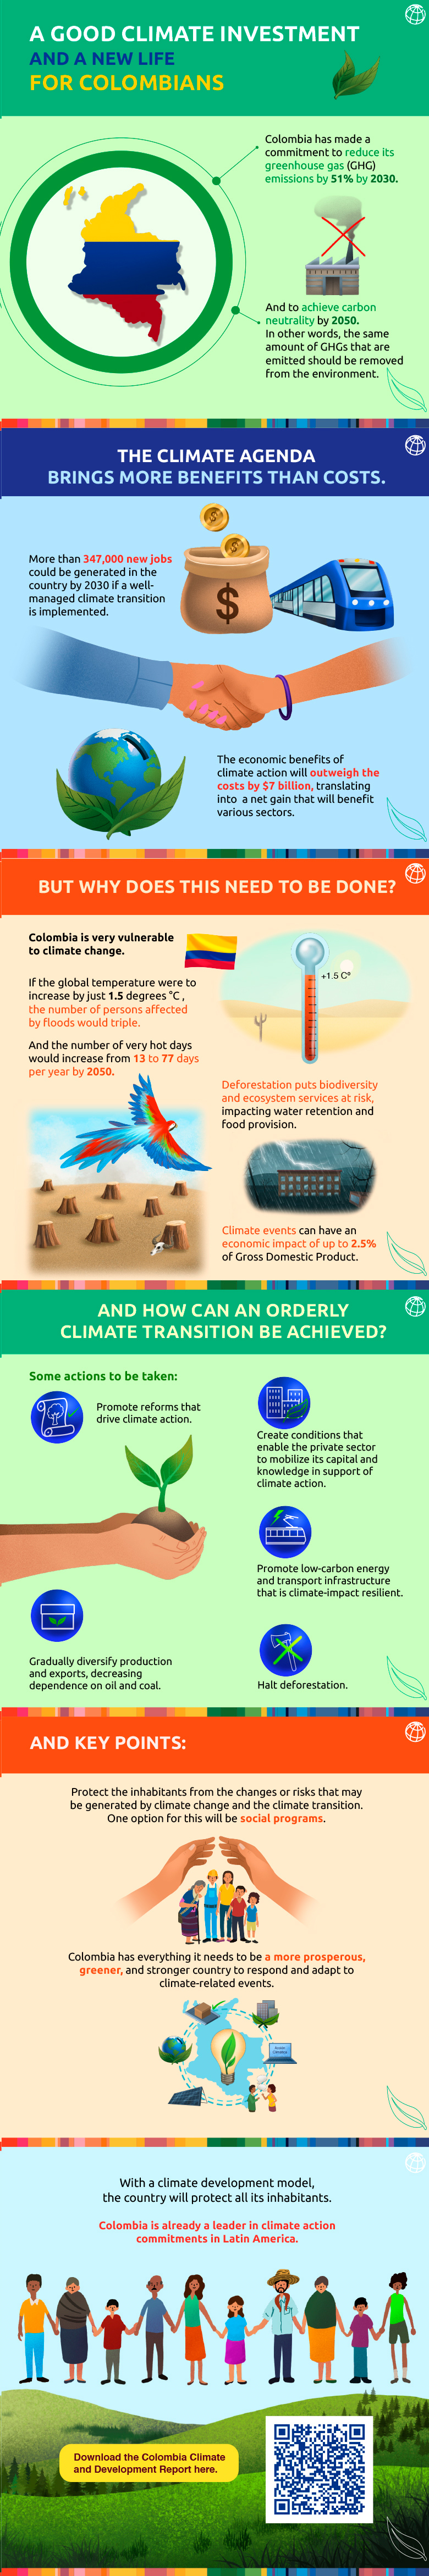 CCDR Country Climate and Development Report infographic